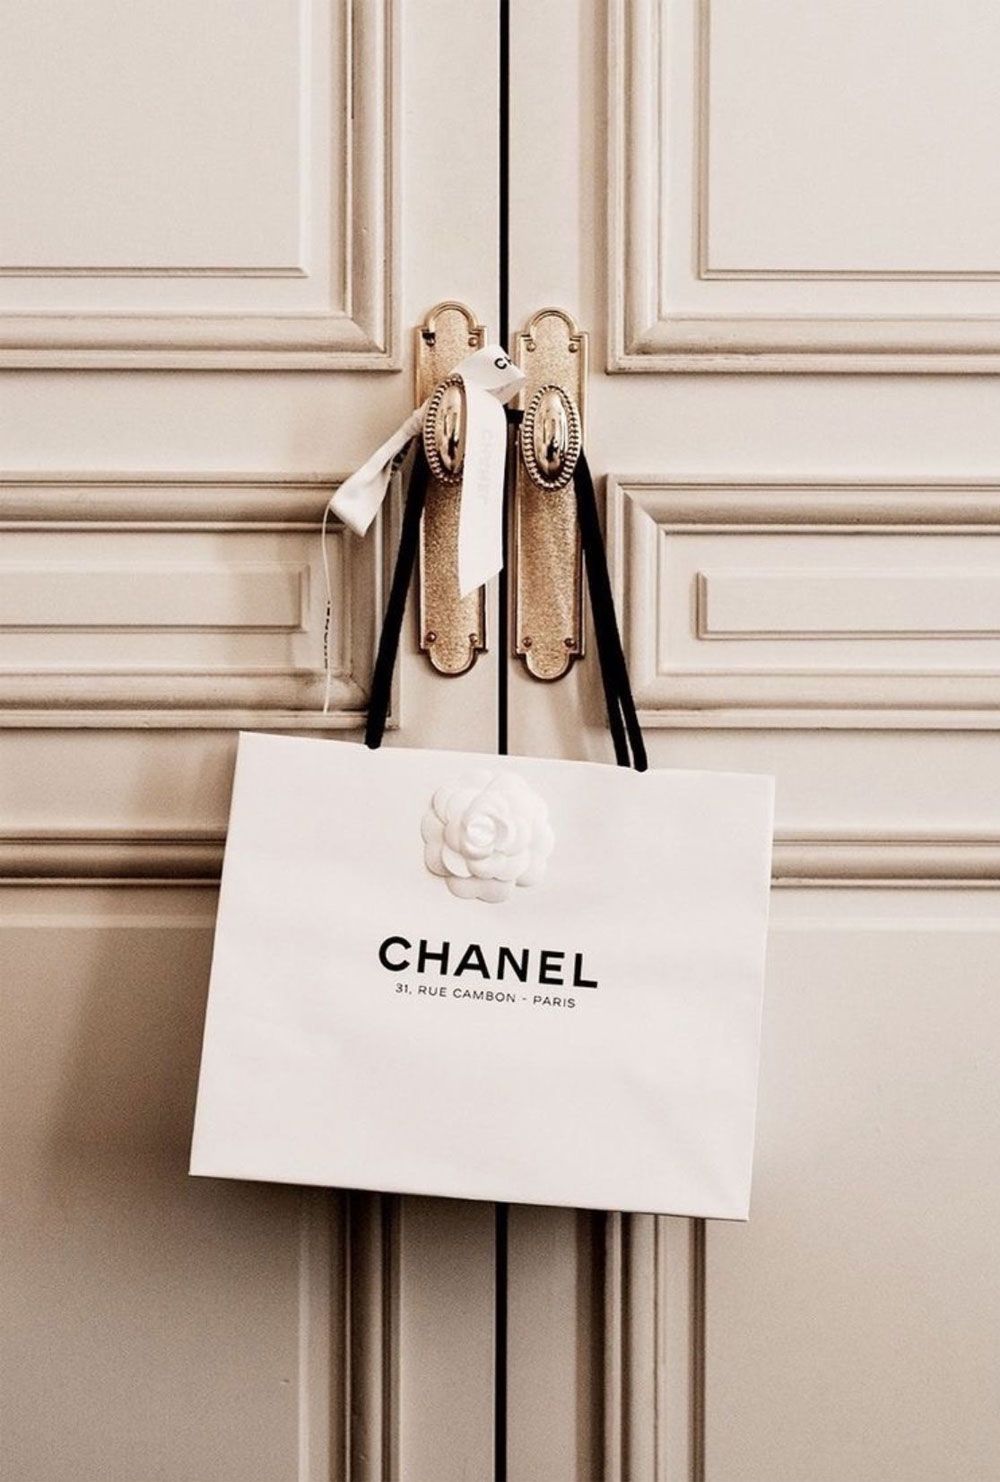 Chanel paper bag hanging on a door handle - Fashion, Chanel, Dior